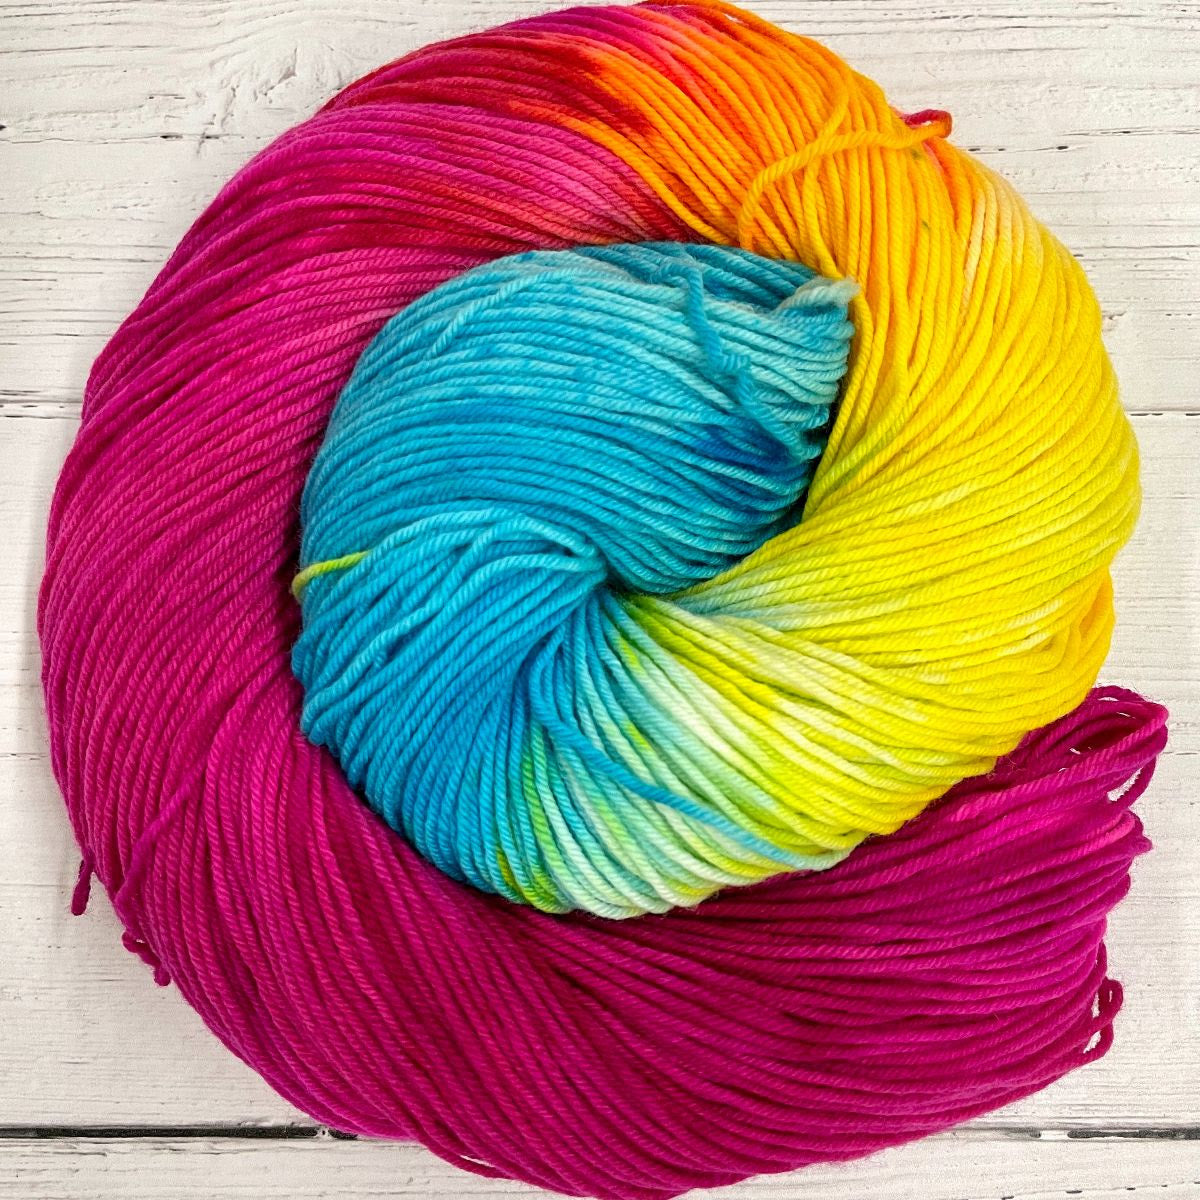 Knitted Wit Herstory 2022 yarn color Thirsty Thursday, a bright pink, blue and yellow skein